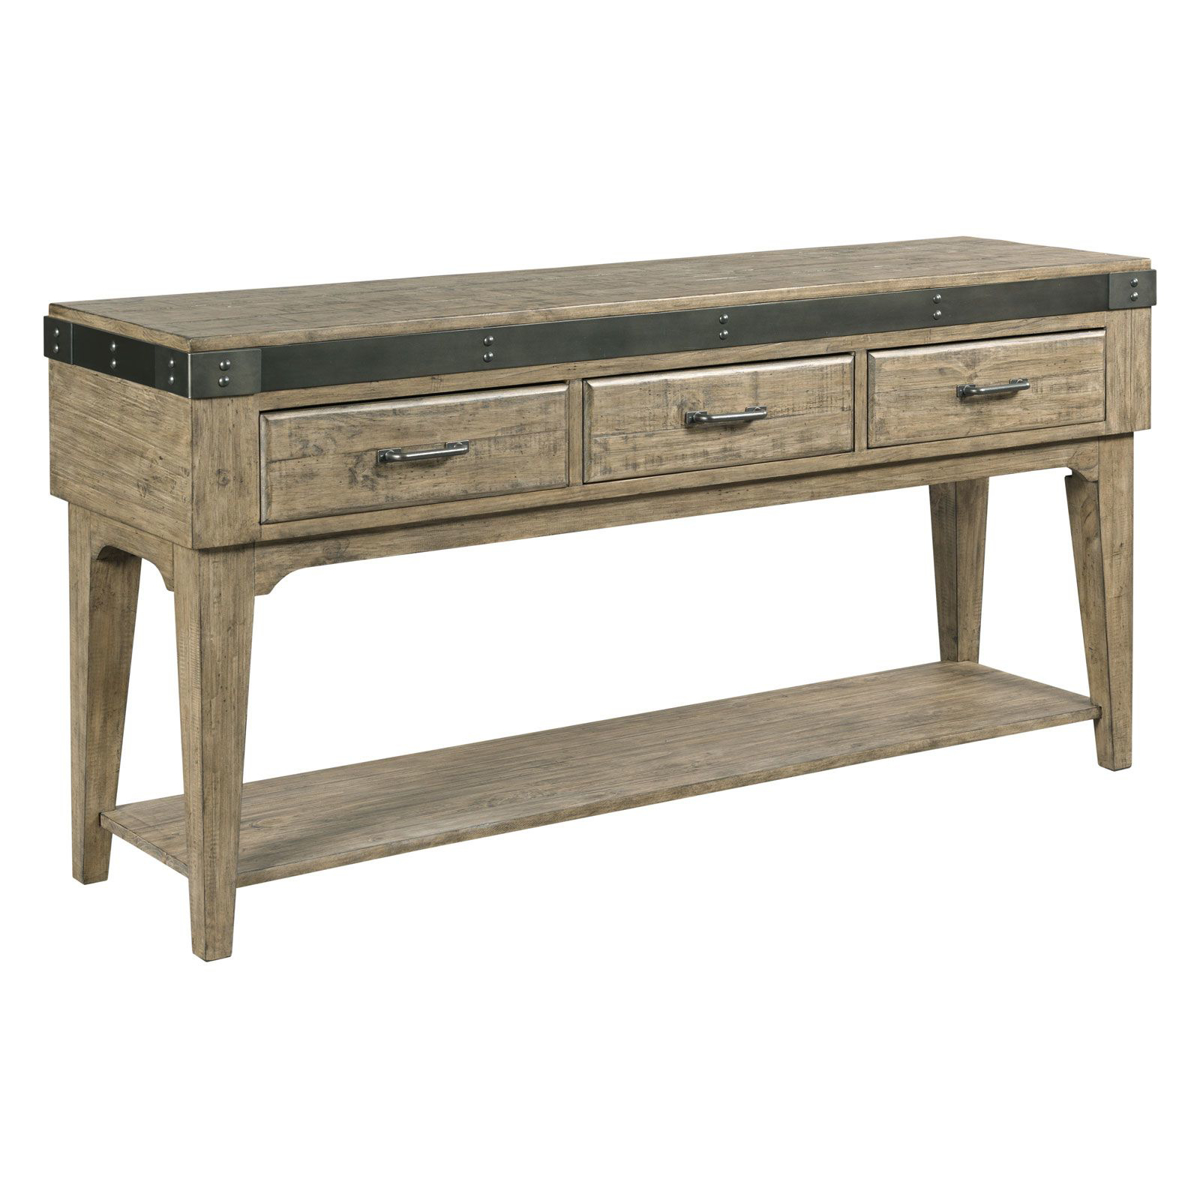 Picture of Plank Road Artisan's Sideboard